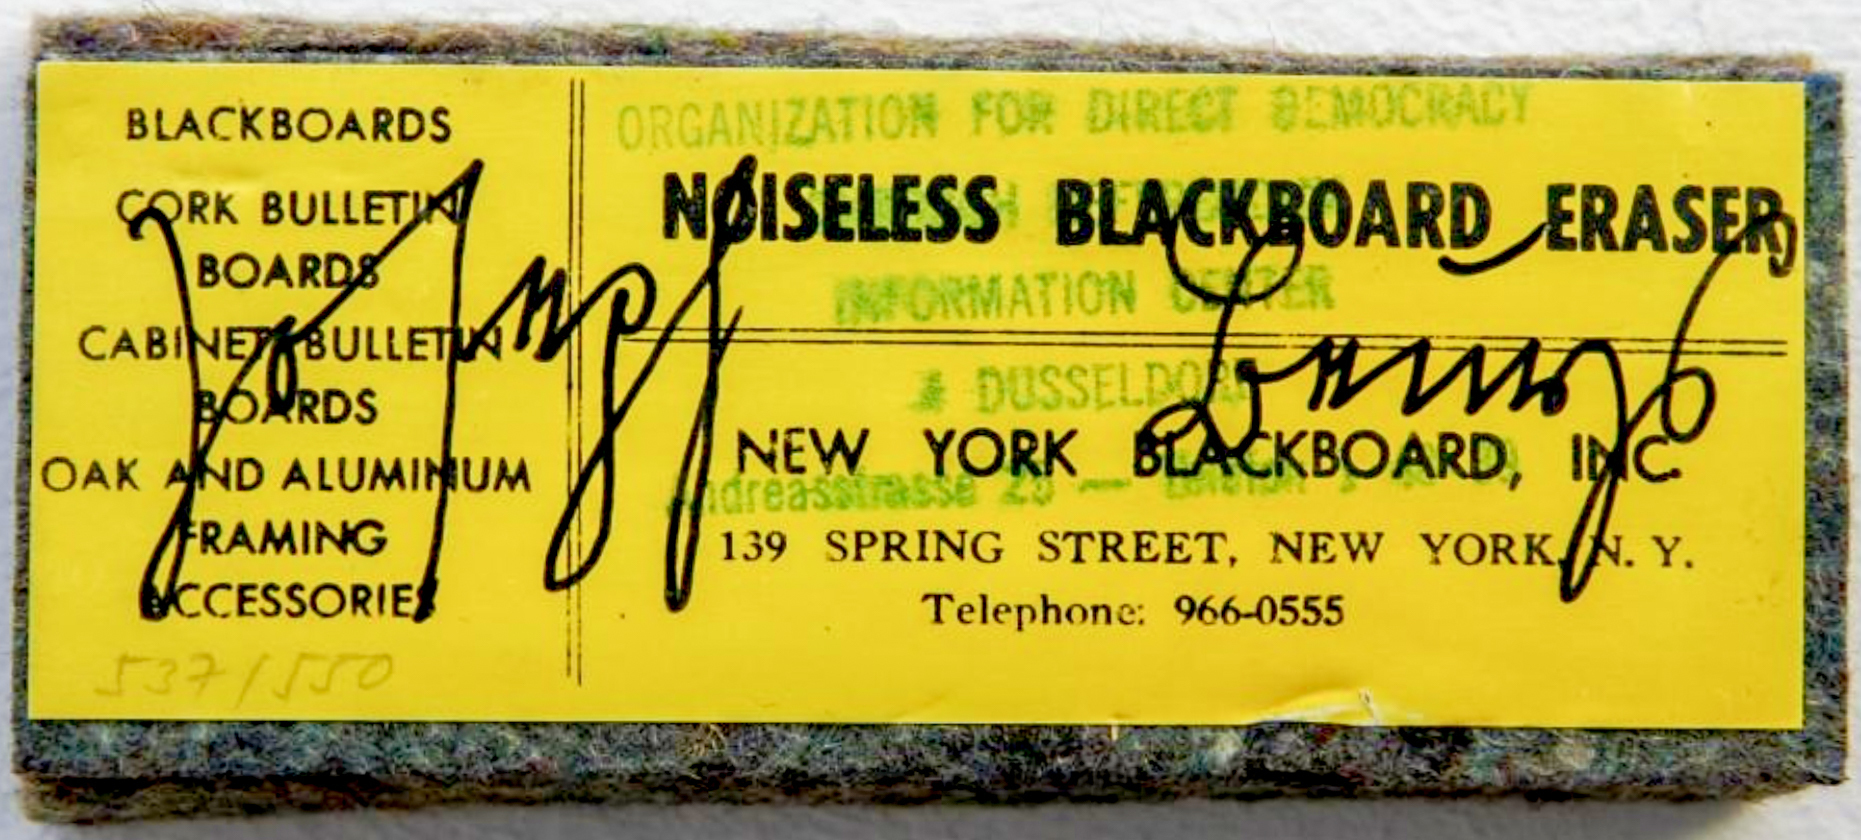 Joseph BEUYS (1921 - 1986)Felt blackboard eraser, stamped, signed and numberedLabel yellow, typography black. Signed in felt pen in Sütterlin (prewar German) script; numbered in pencil by another hand; a very few copies experimentally numbered by stamping.2 x 5 1/8 x 1 in (5 x 13 x 2,5 cm)Edition of 550 + 6 a.p. ; Ed. 537/550Publisher: Ronald Feldman Fine Arts, New YorkBeuys had the idea for the edition at a political lecture he held during his first trip to the United States.When collectors wanted to purchase a blackboard he had drawn and written on, Beuys had it erased with this type of blackboard eraserPlease click HERE for full fact sheet